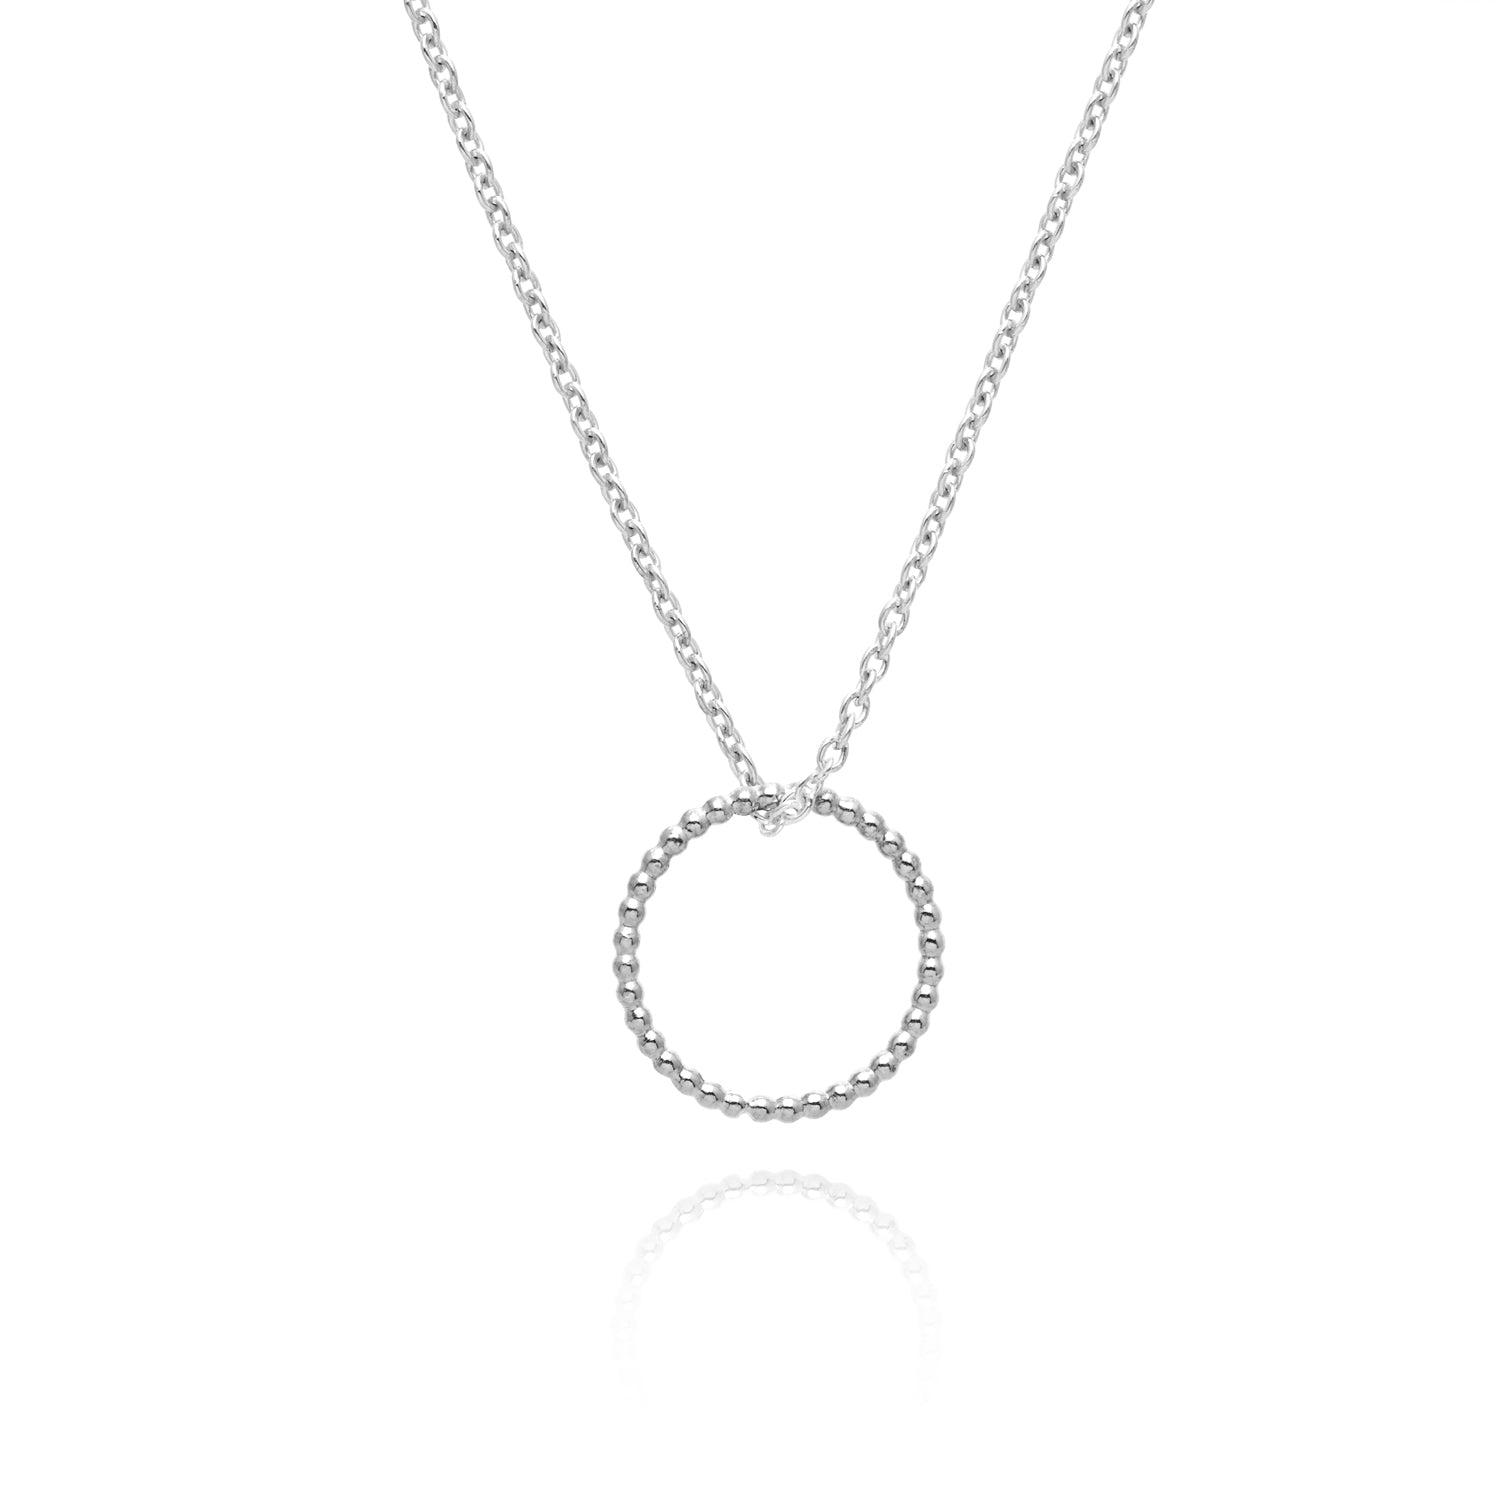 Sphere Circle Necklace - Silver - Myia Bonner Jewellery